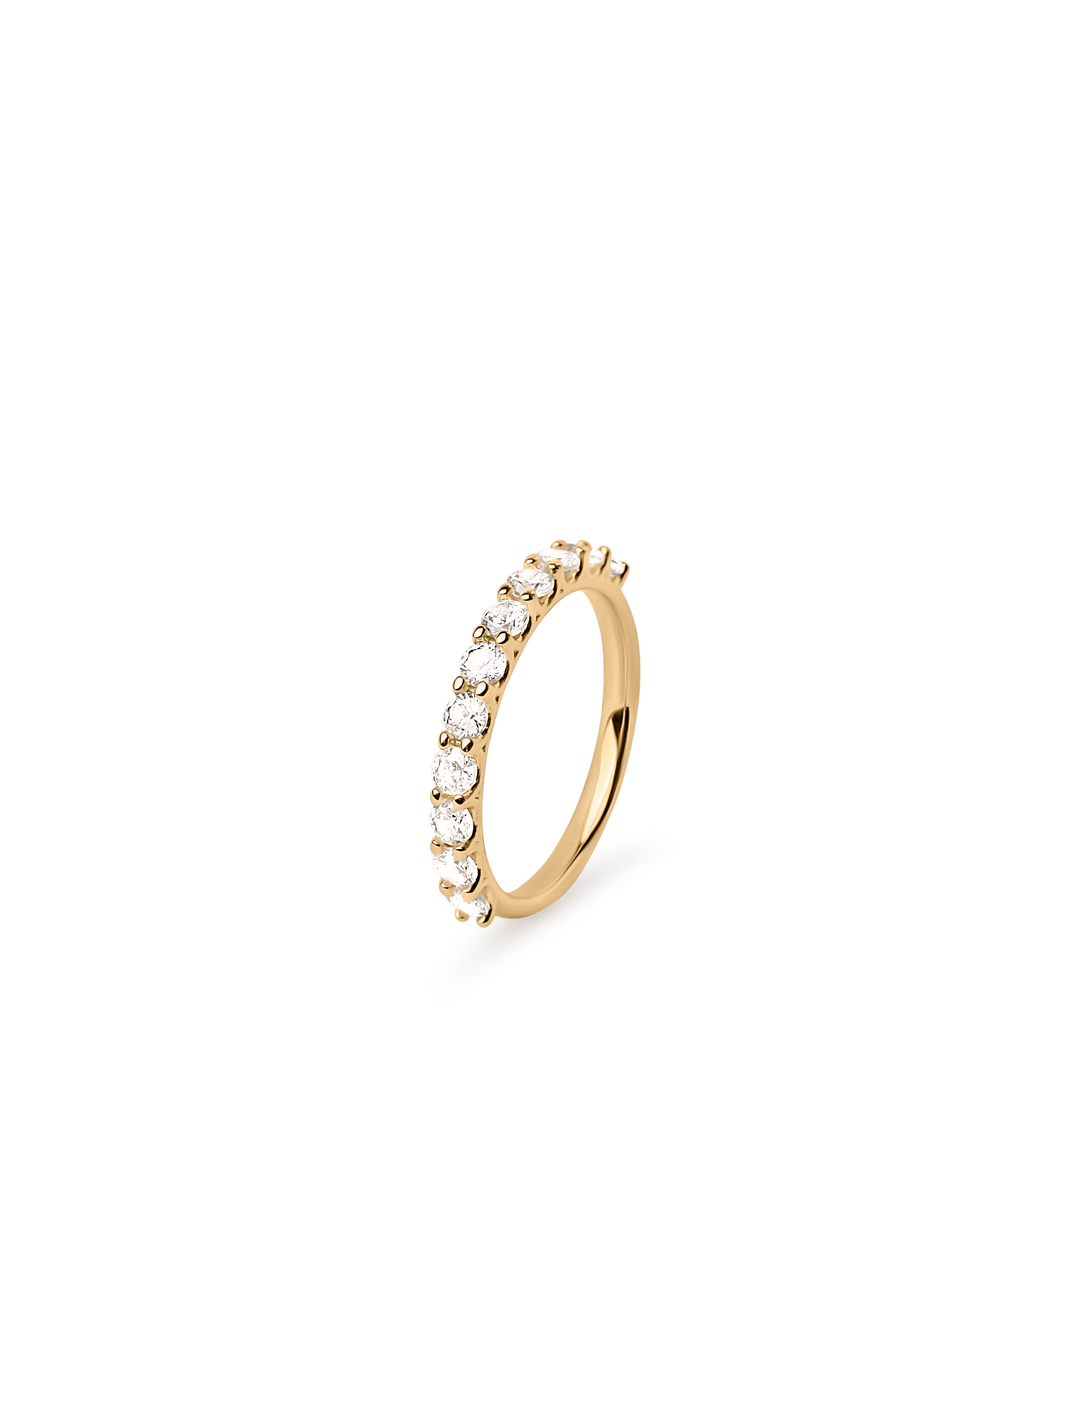 Amore Zirconia Ring 18k gold plated brass